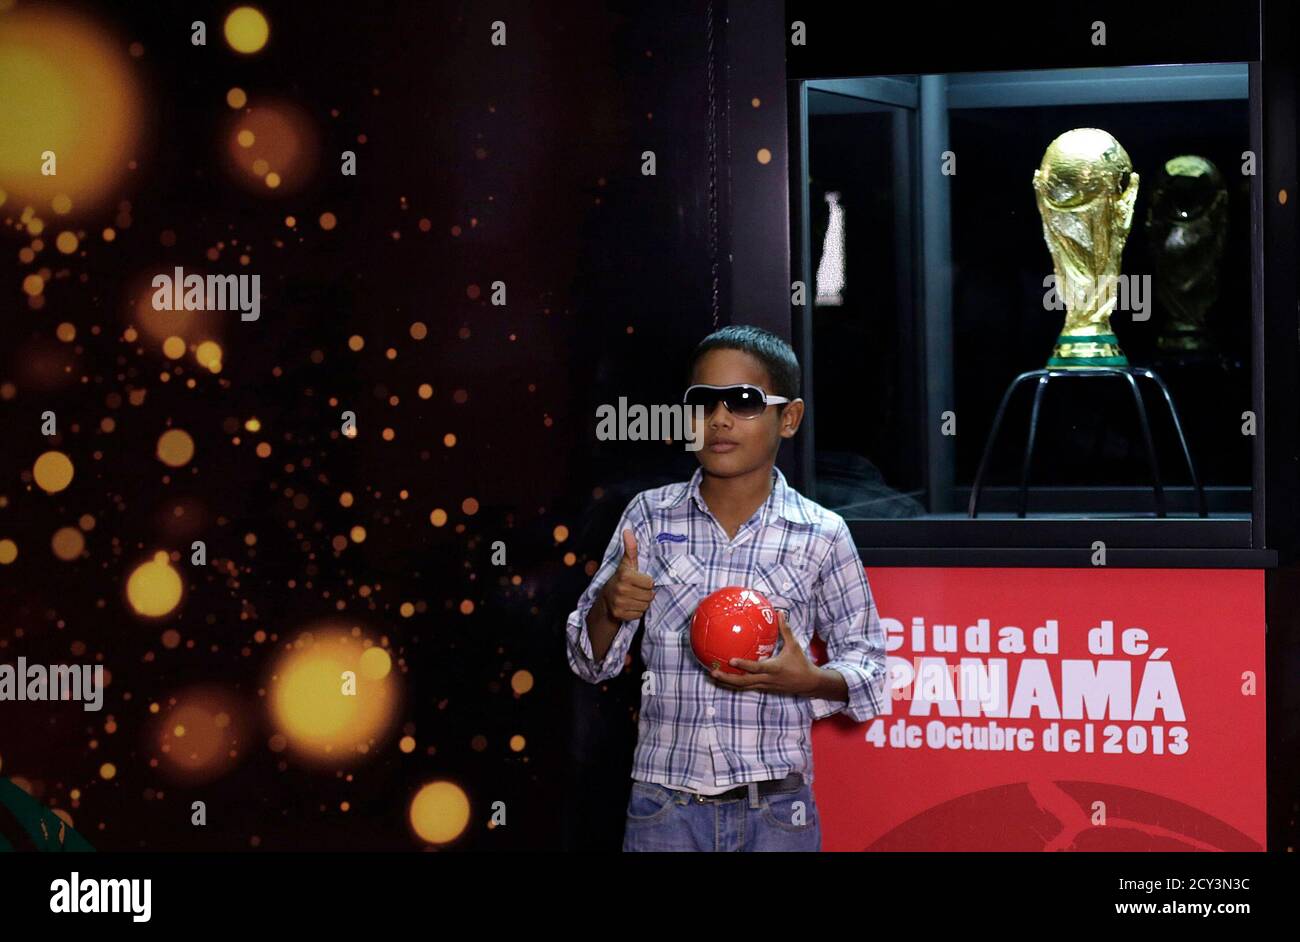 A Boy Poses Next To The Fifa World Cup Trophy In Panama City October 4 13 According To The Organizers The Trophy Will Be On Display In Panama For Two Days As